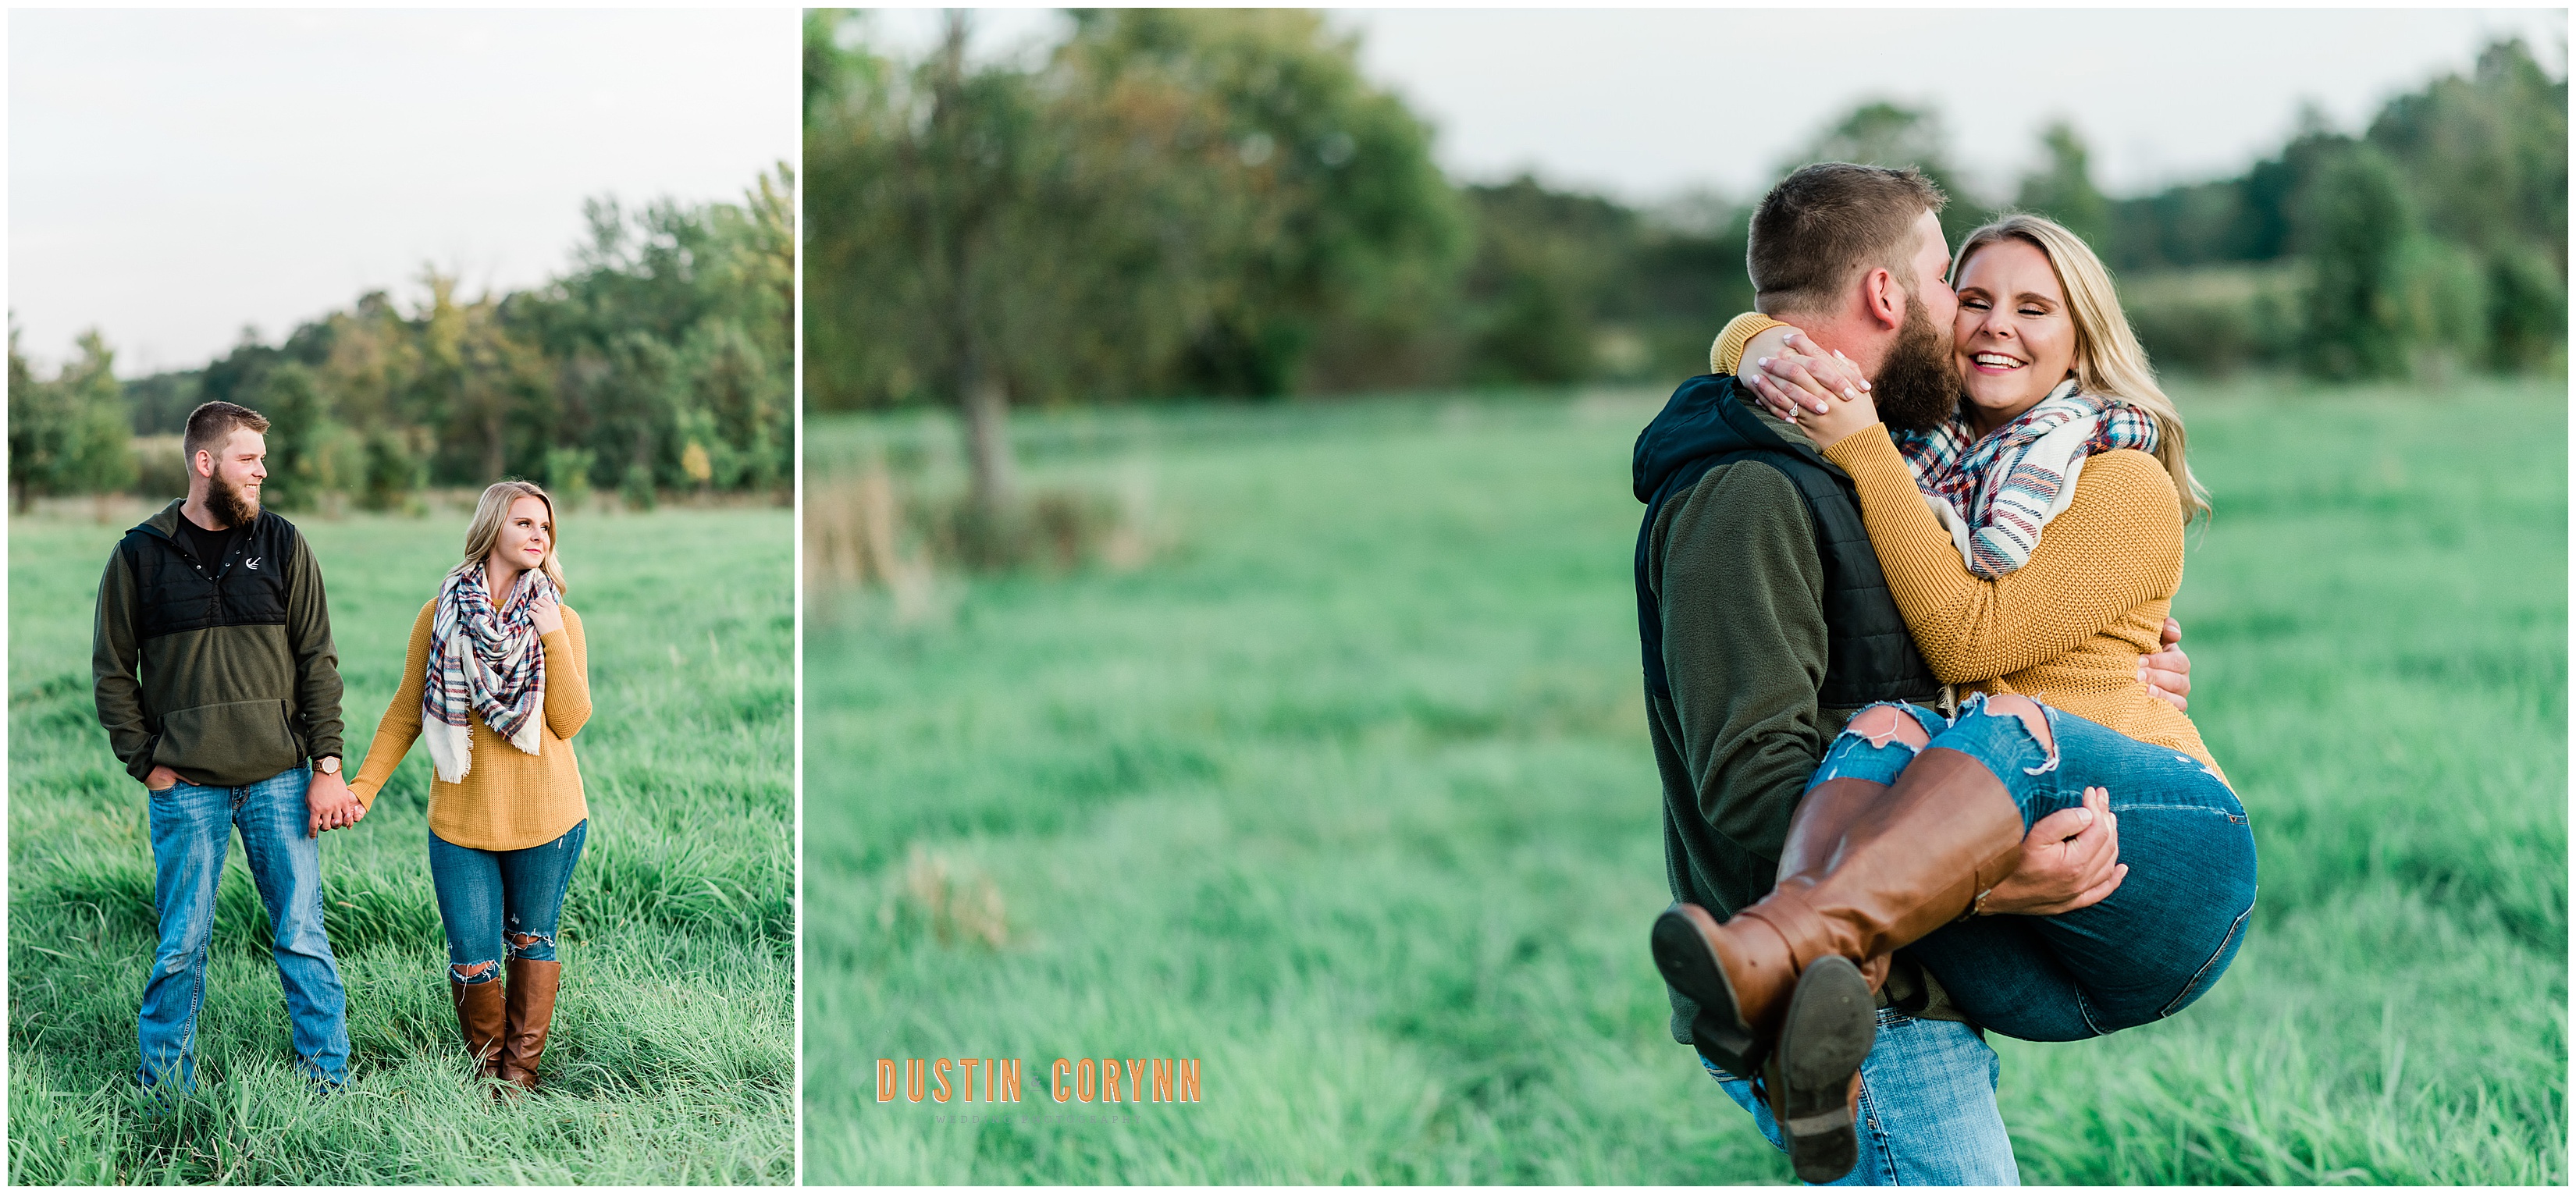 Couple at Engagement Session